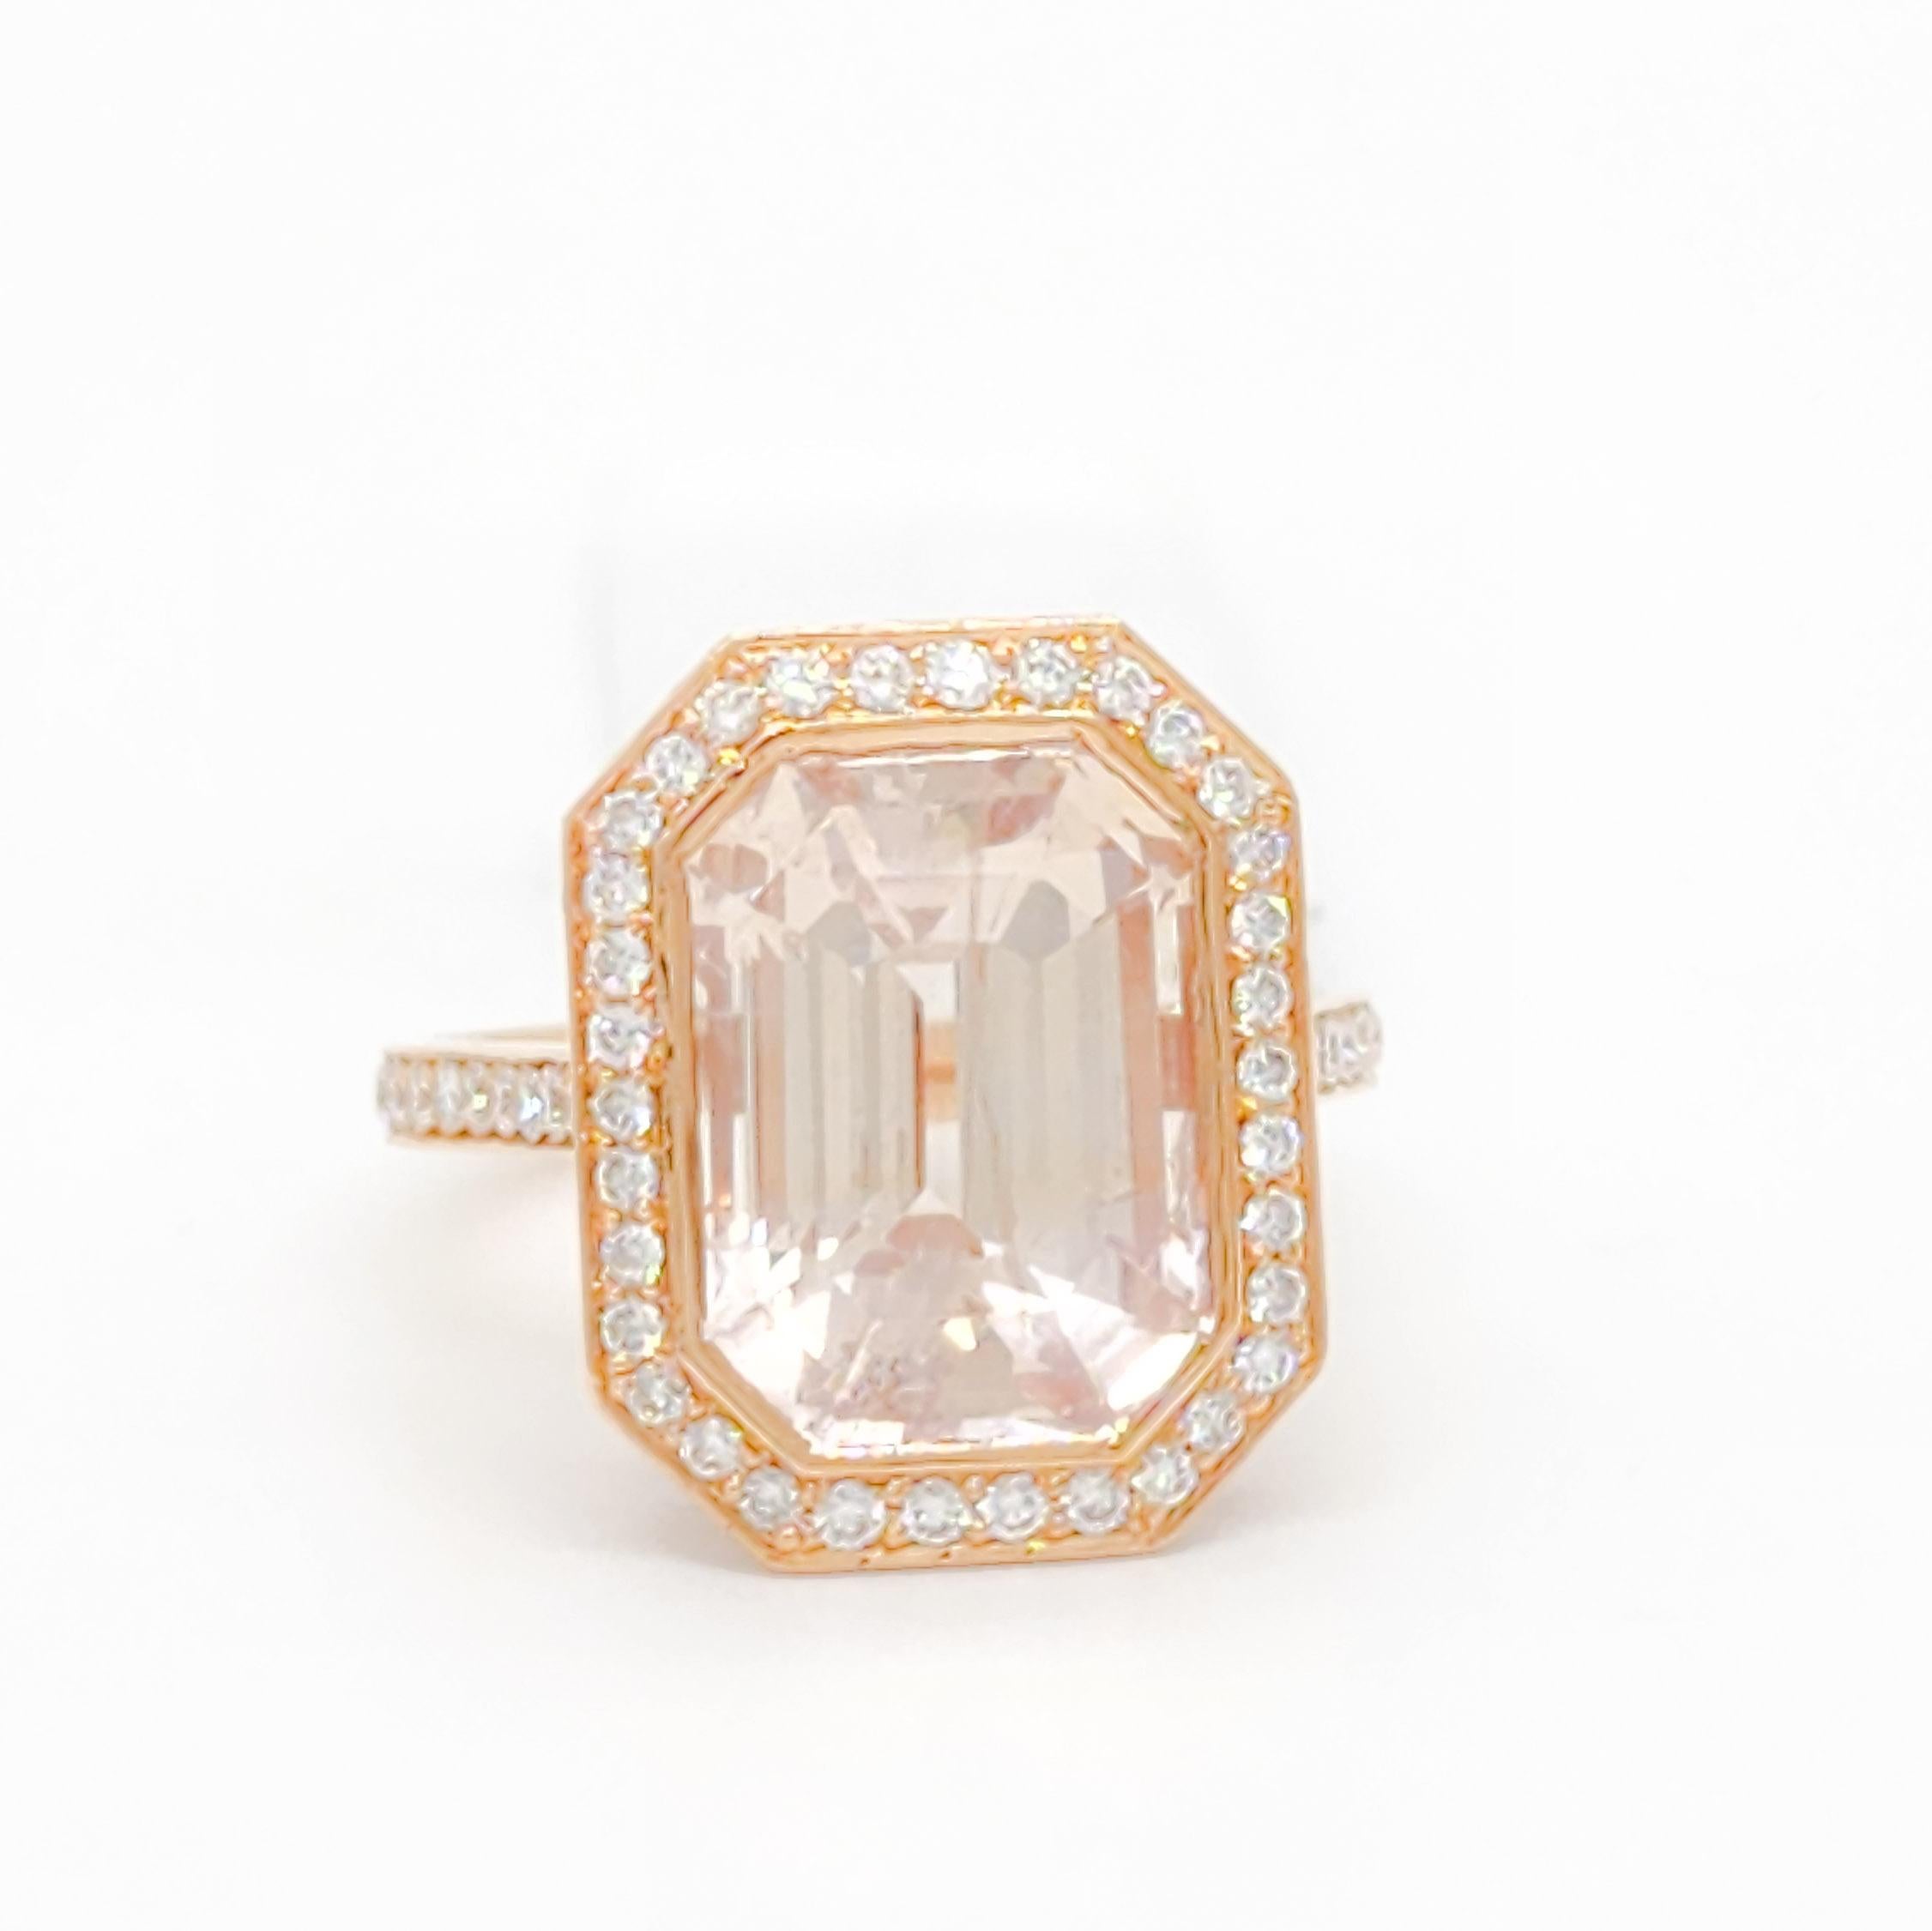 Gorgeous 10.08 ct. GIA unheated very light orange sapphire octagon with 1.06 ct. good quality white diamond rounds.  Handmade in 18k rose gold.  Ring size 6.5.